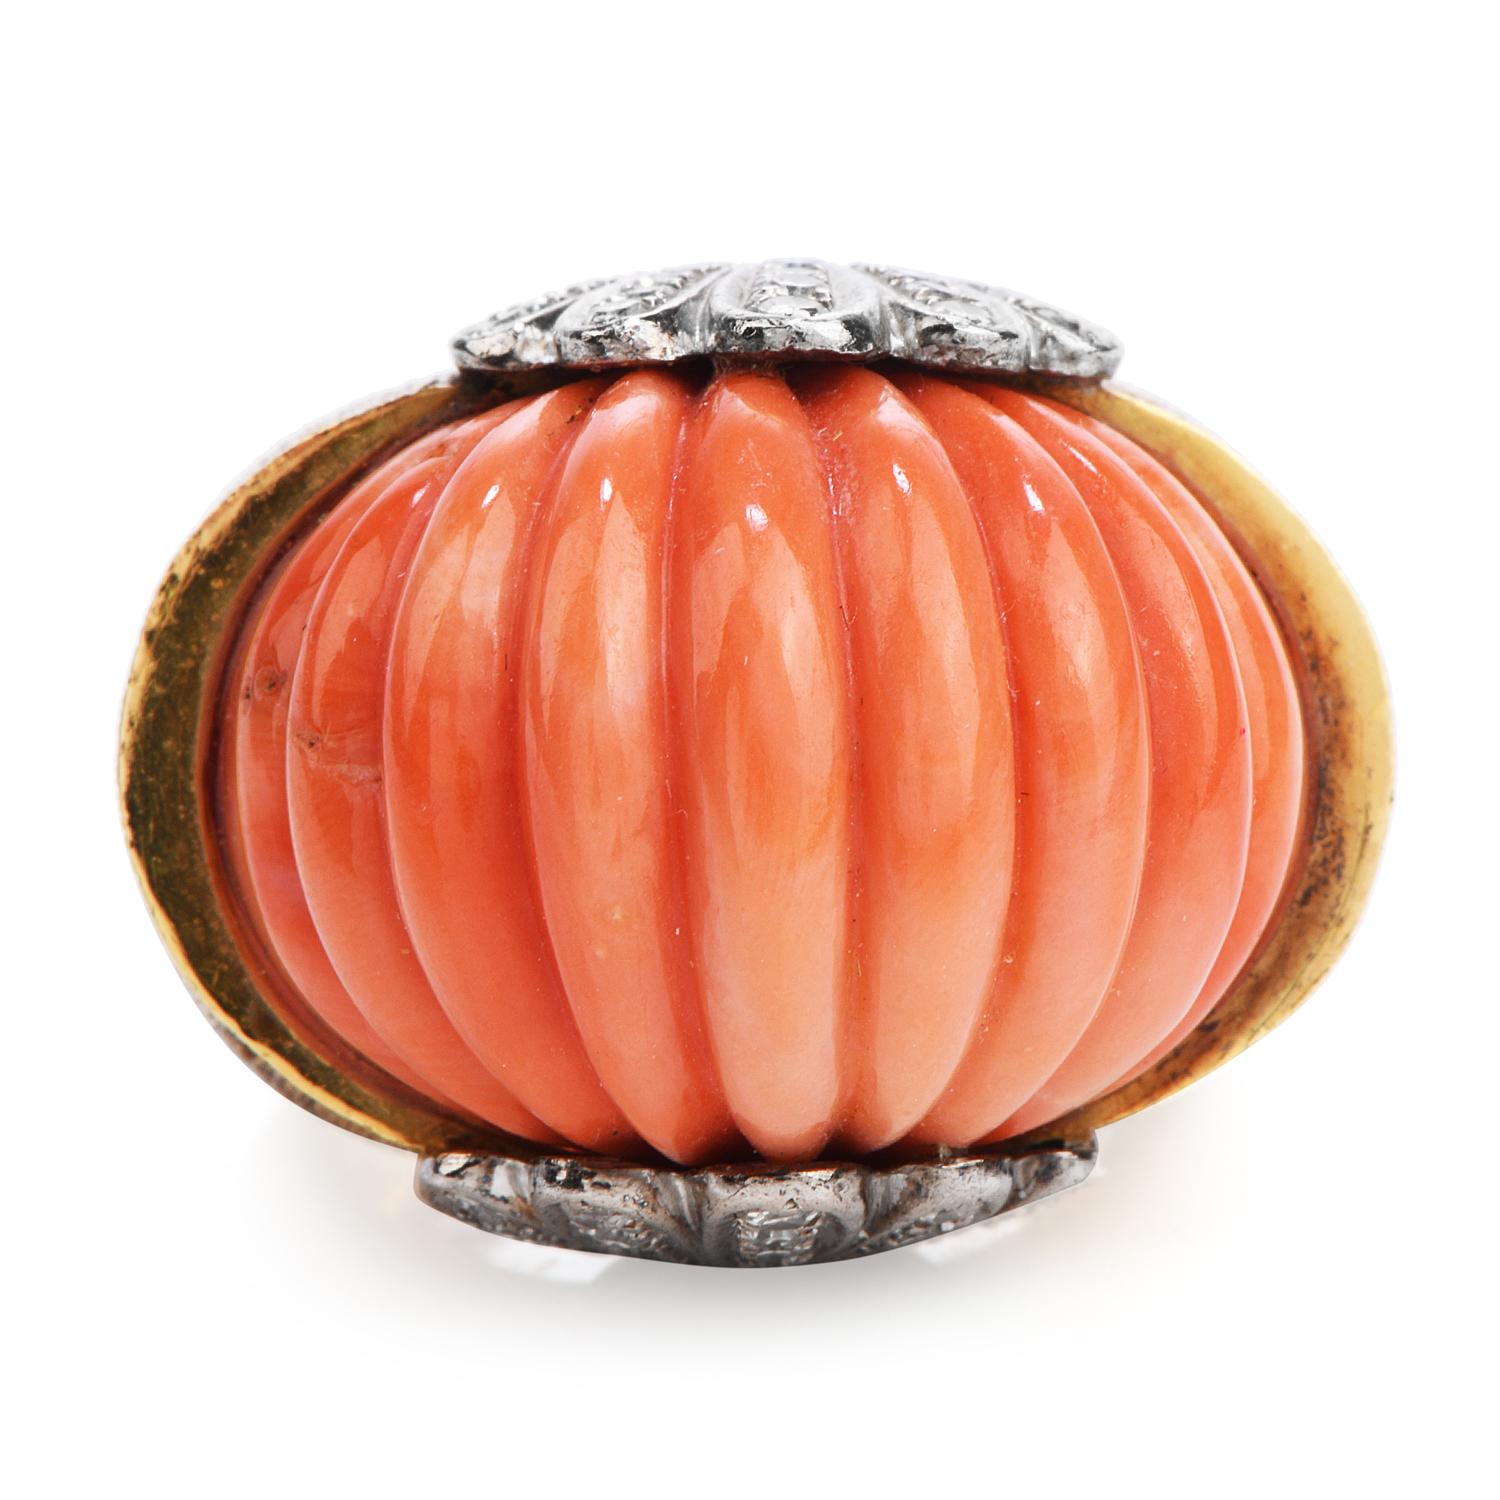 From the late 1970s, this Vintage Retro solid 18K Yellow Gold ring, is flanked by (2) diamond-encrusted shells in 18K White Gold.

Exposing a Genuine Carved Natural Salmon Color Coral in the center, this stylish beauty measures  22.12 x 14.5 mm, 13